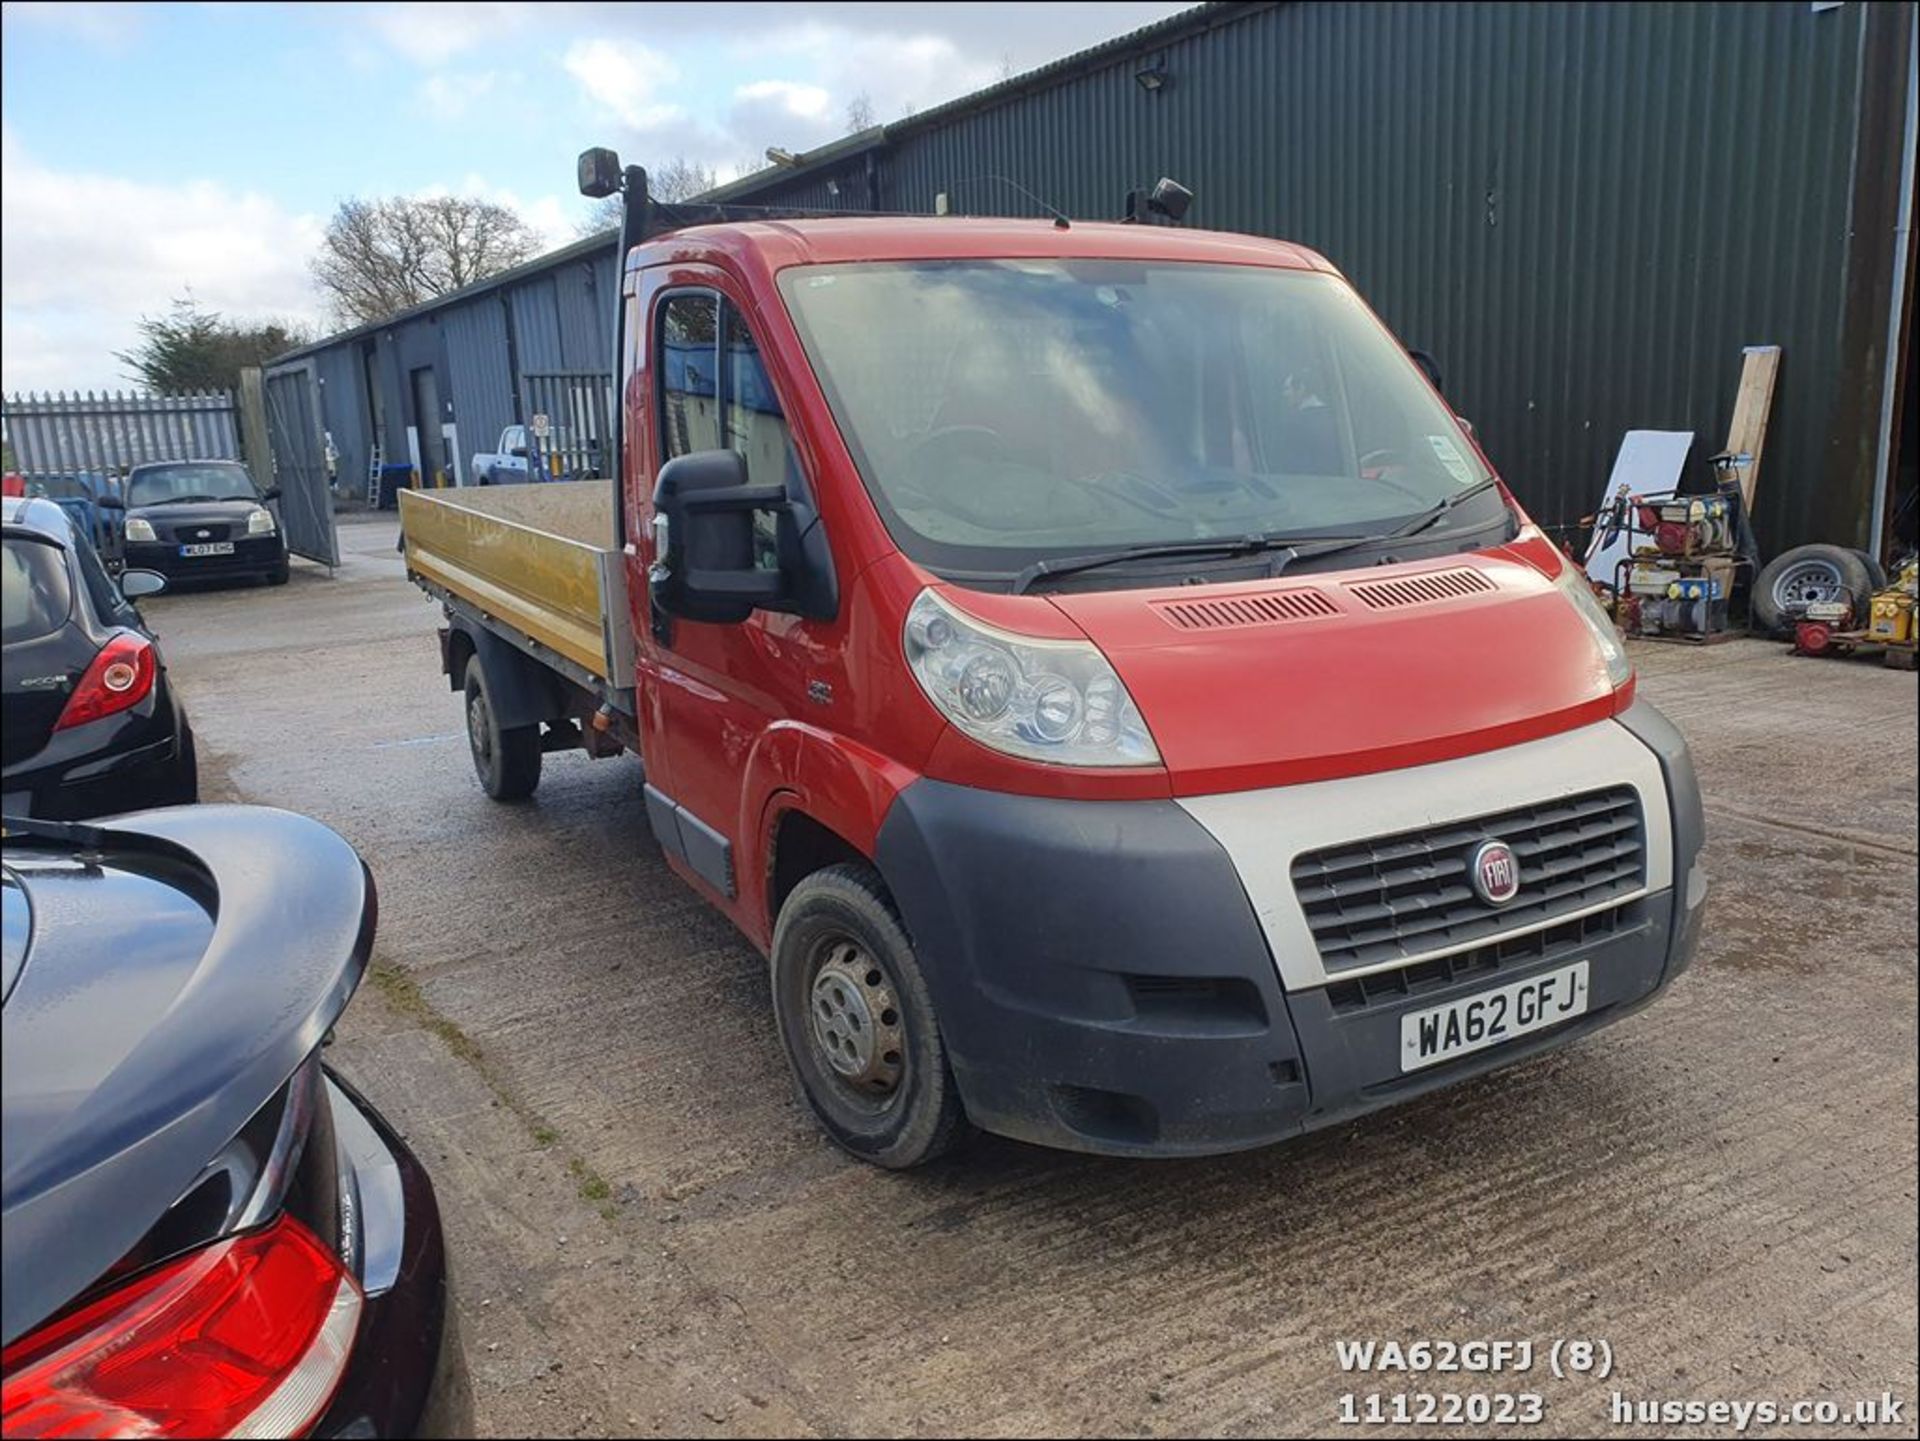 12/62 FIAT DUCATO 35 MULTIJET - 2287cc 2.dr Flat Bed (Red) - Image 9 of 52